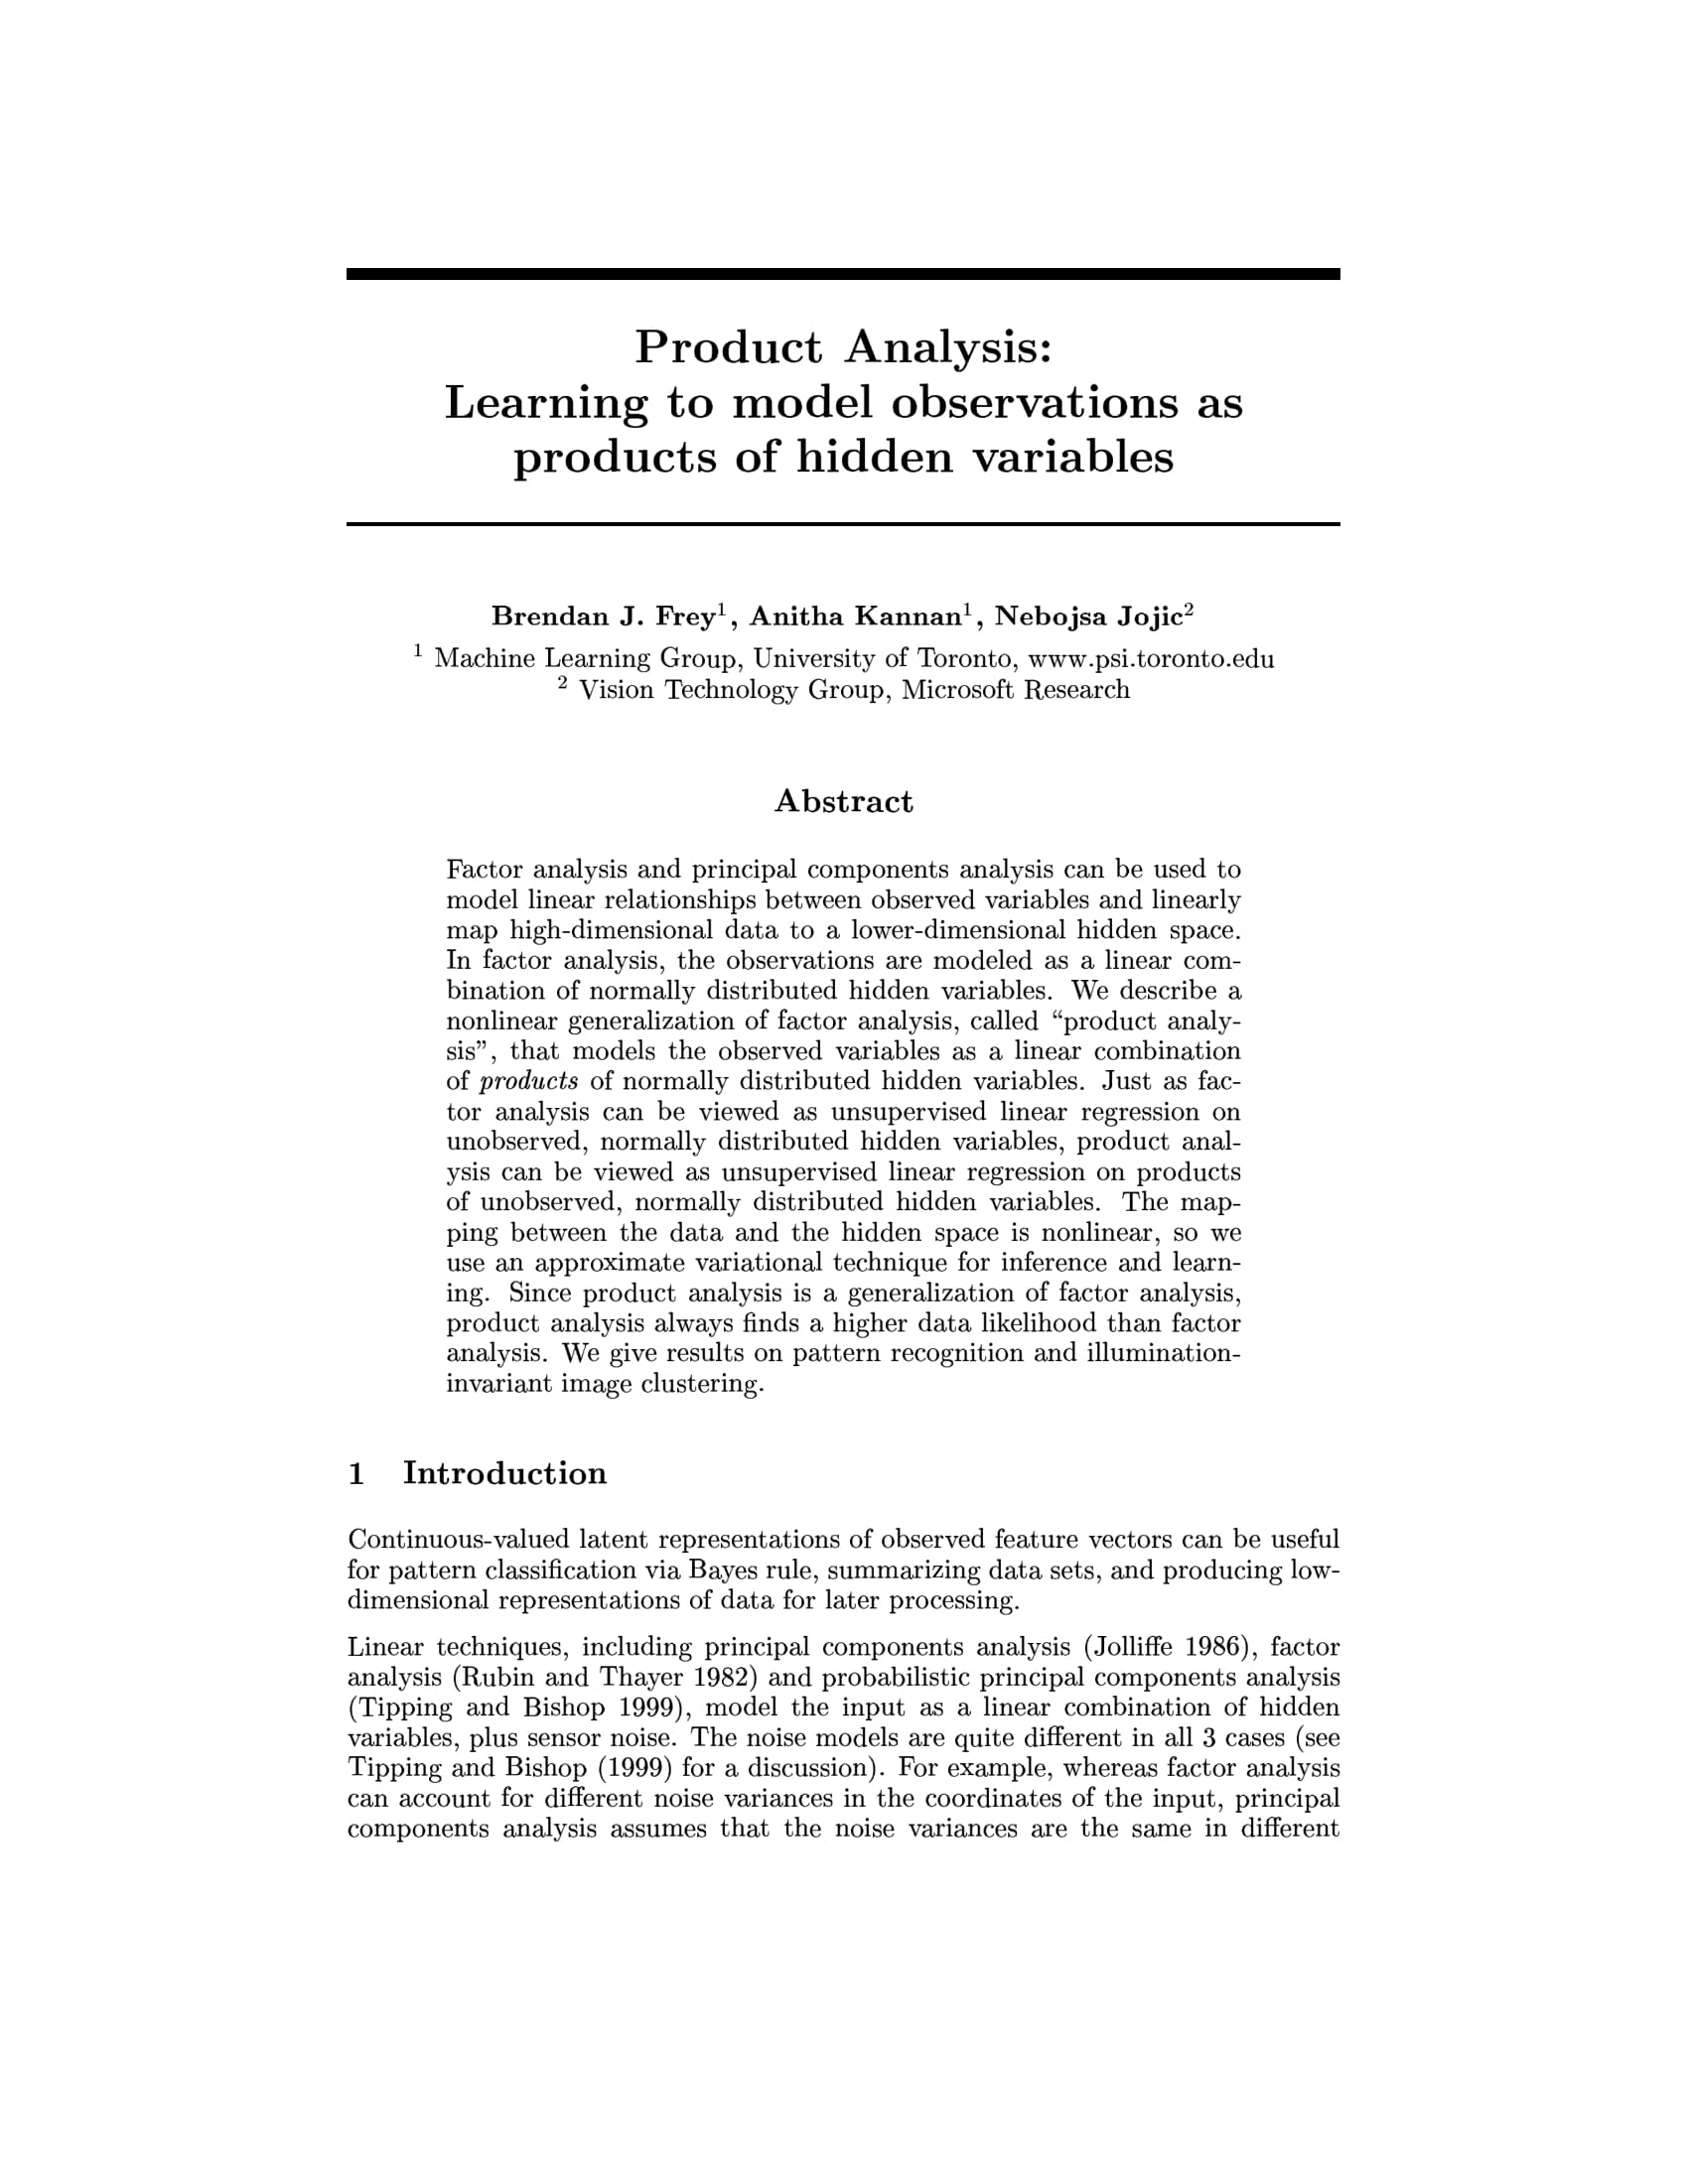 product analysis learning to model observations as products of hidden variables example 1